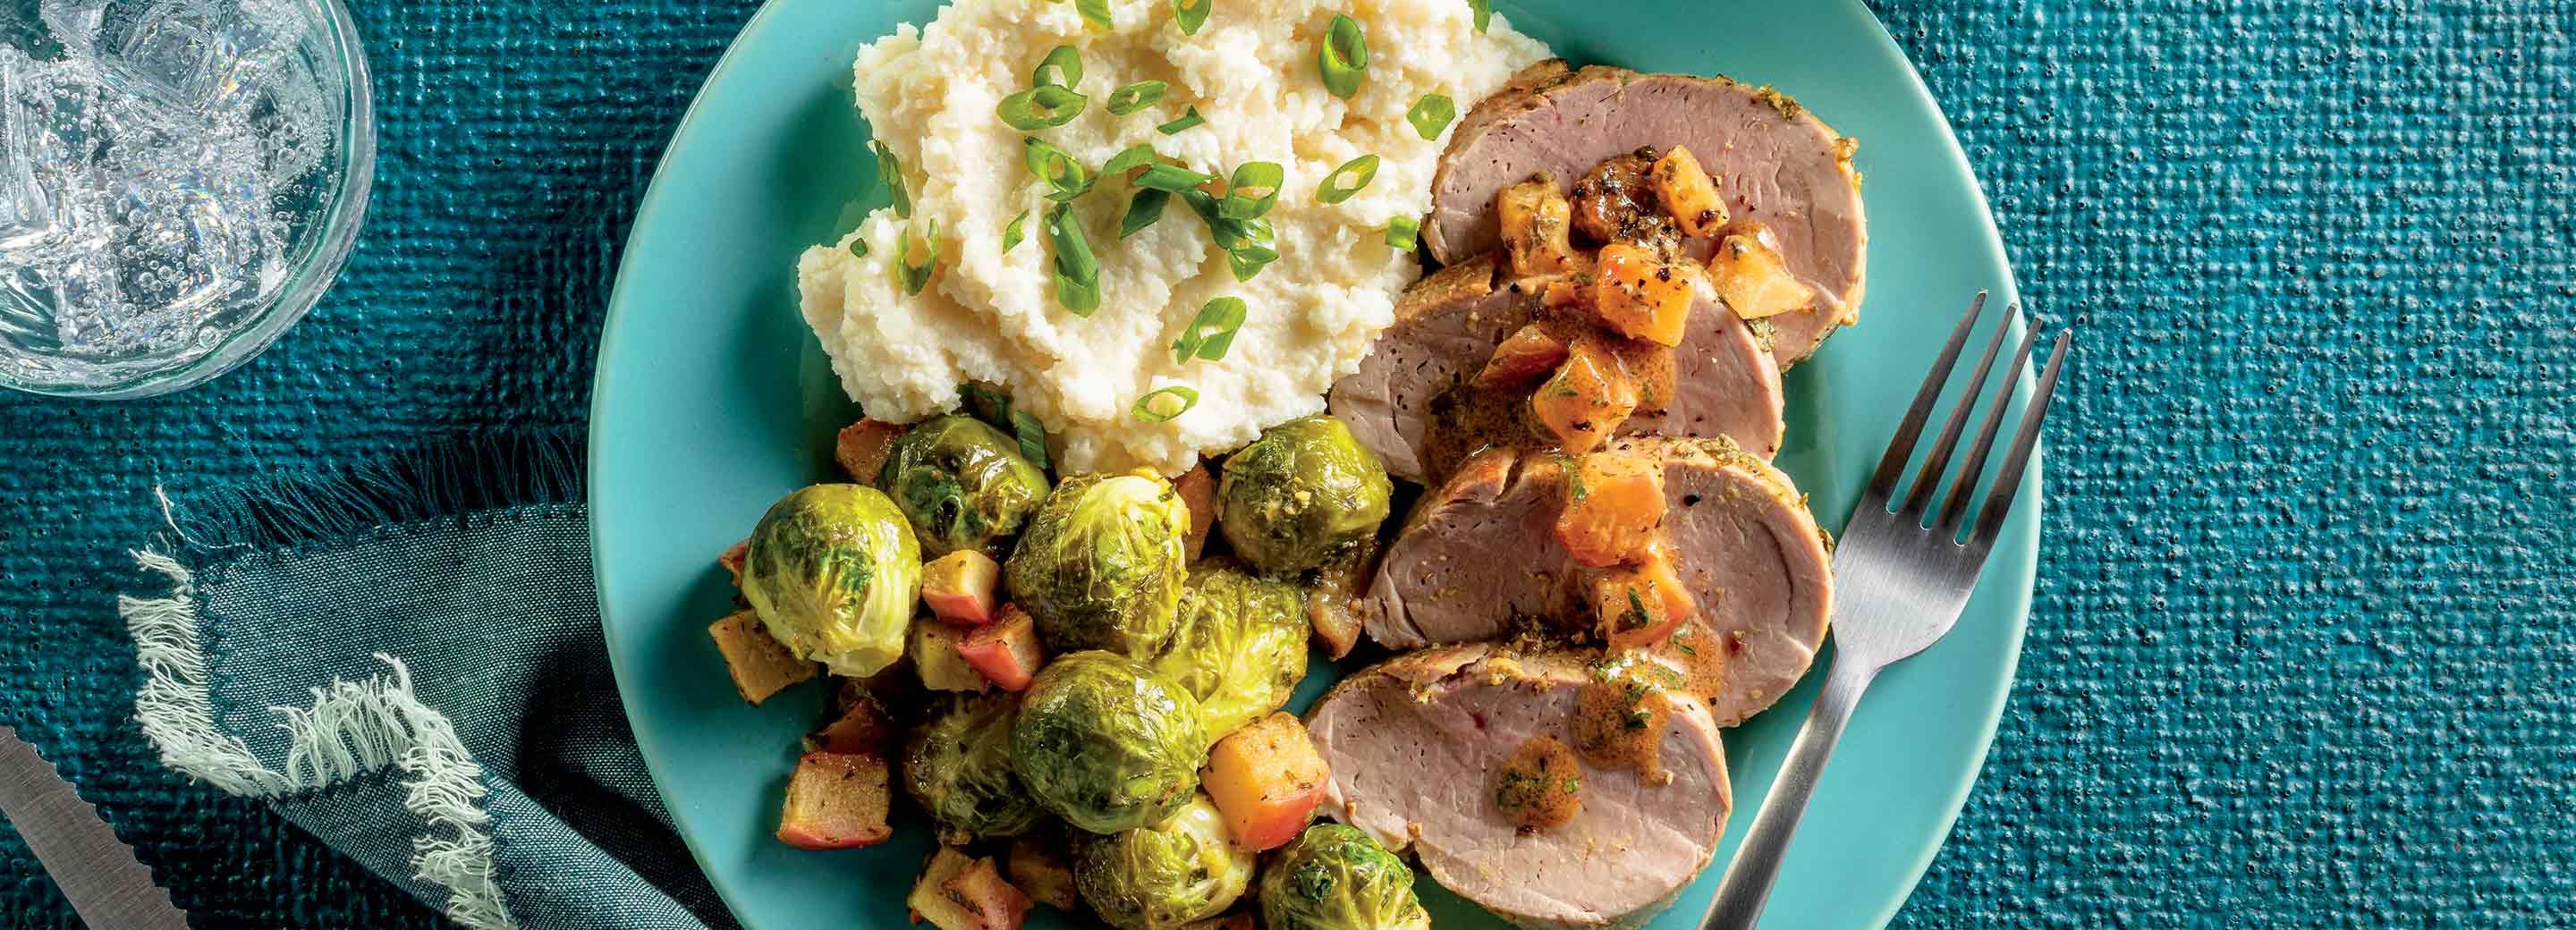 Pork Tenderloin and Apples with Parmesan Mashed Cauliflower Brussels Sprouts